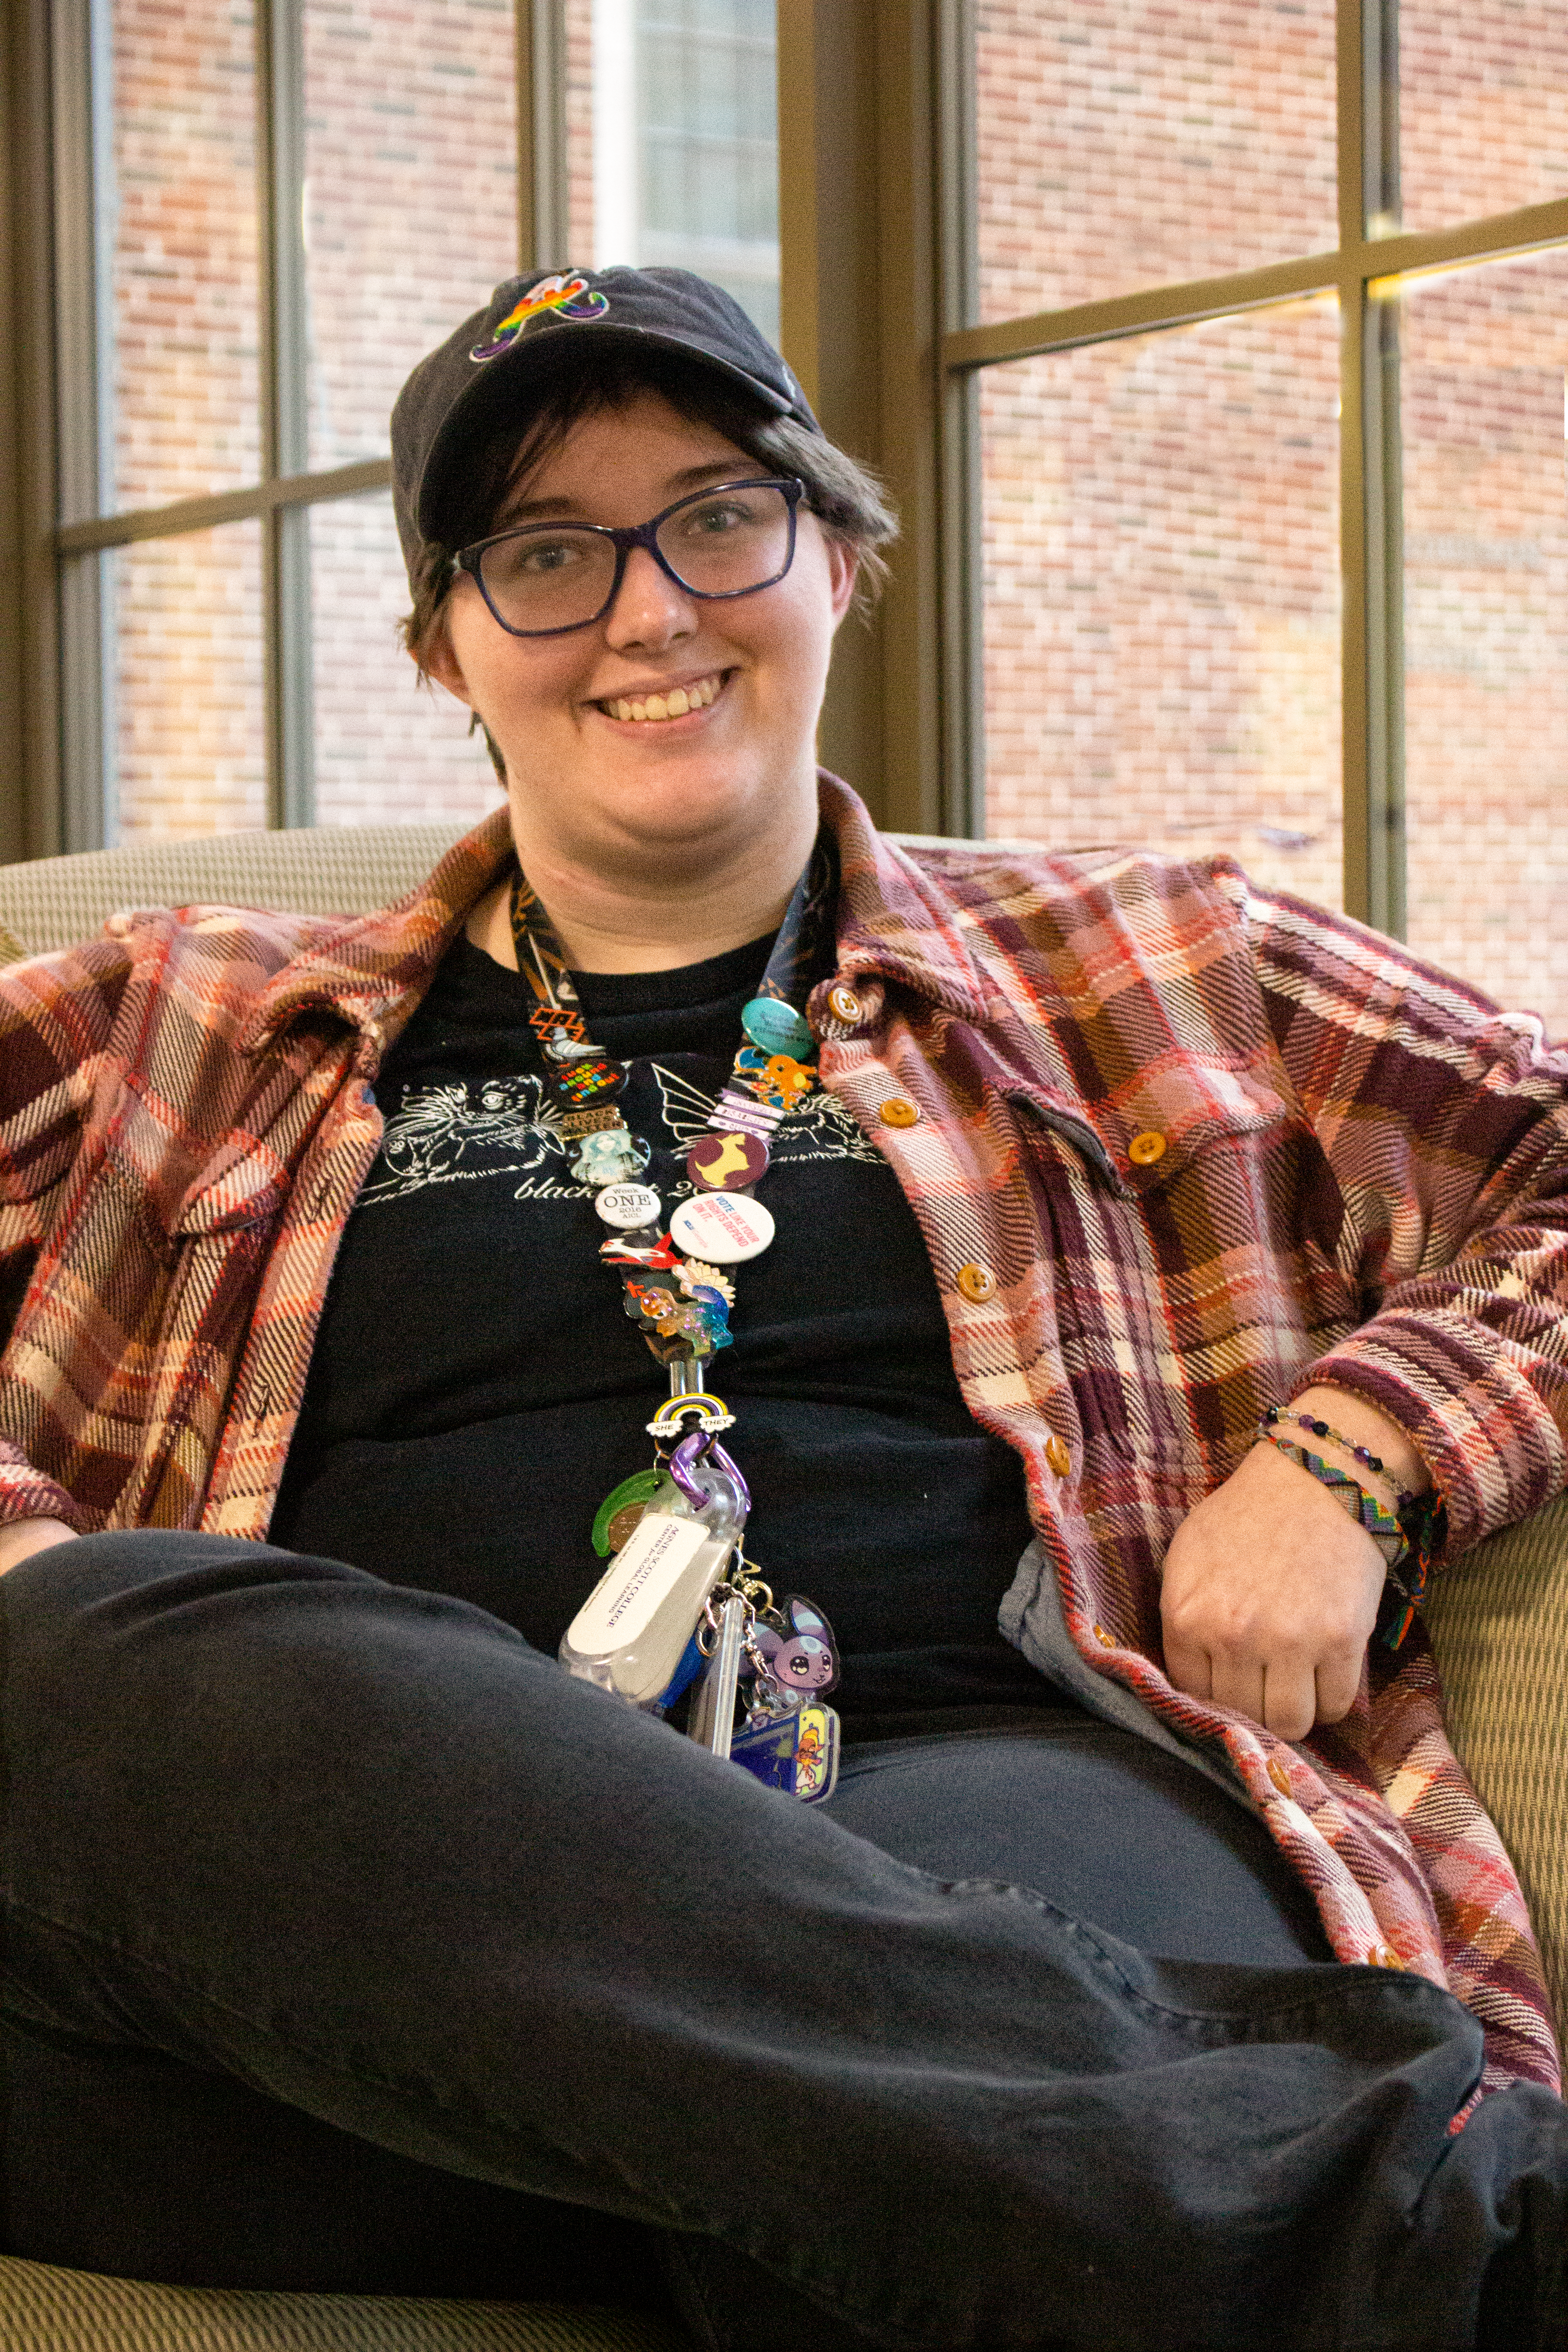 A person sitting cross-legged in a chair in front of a series of large windows. They are wearing black pants, a lanyard decorated with various pins, a black t-shirt, and a pink-and-brown flannel jacket.